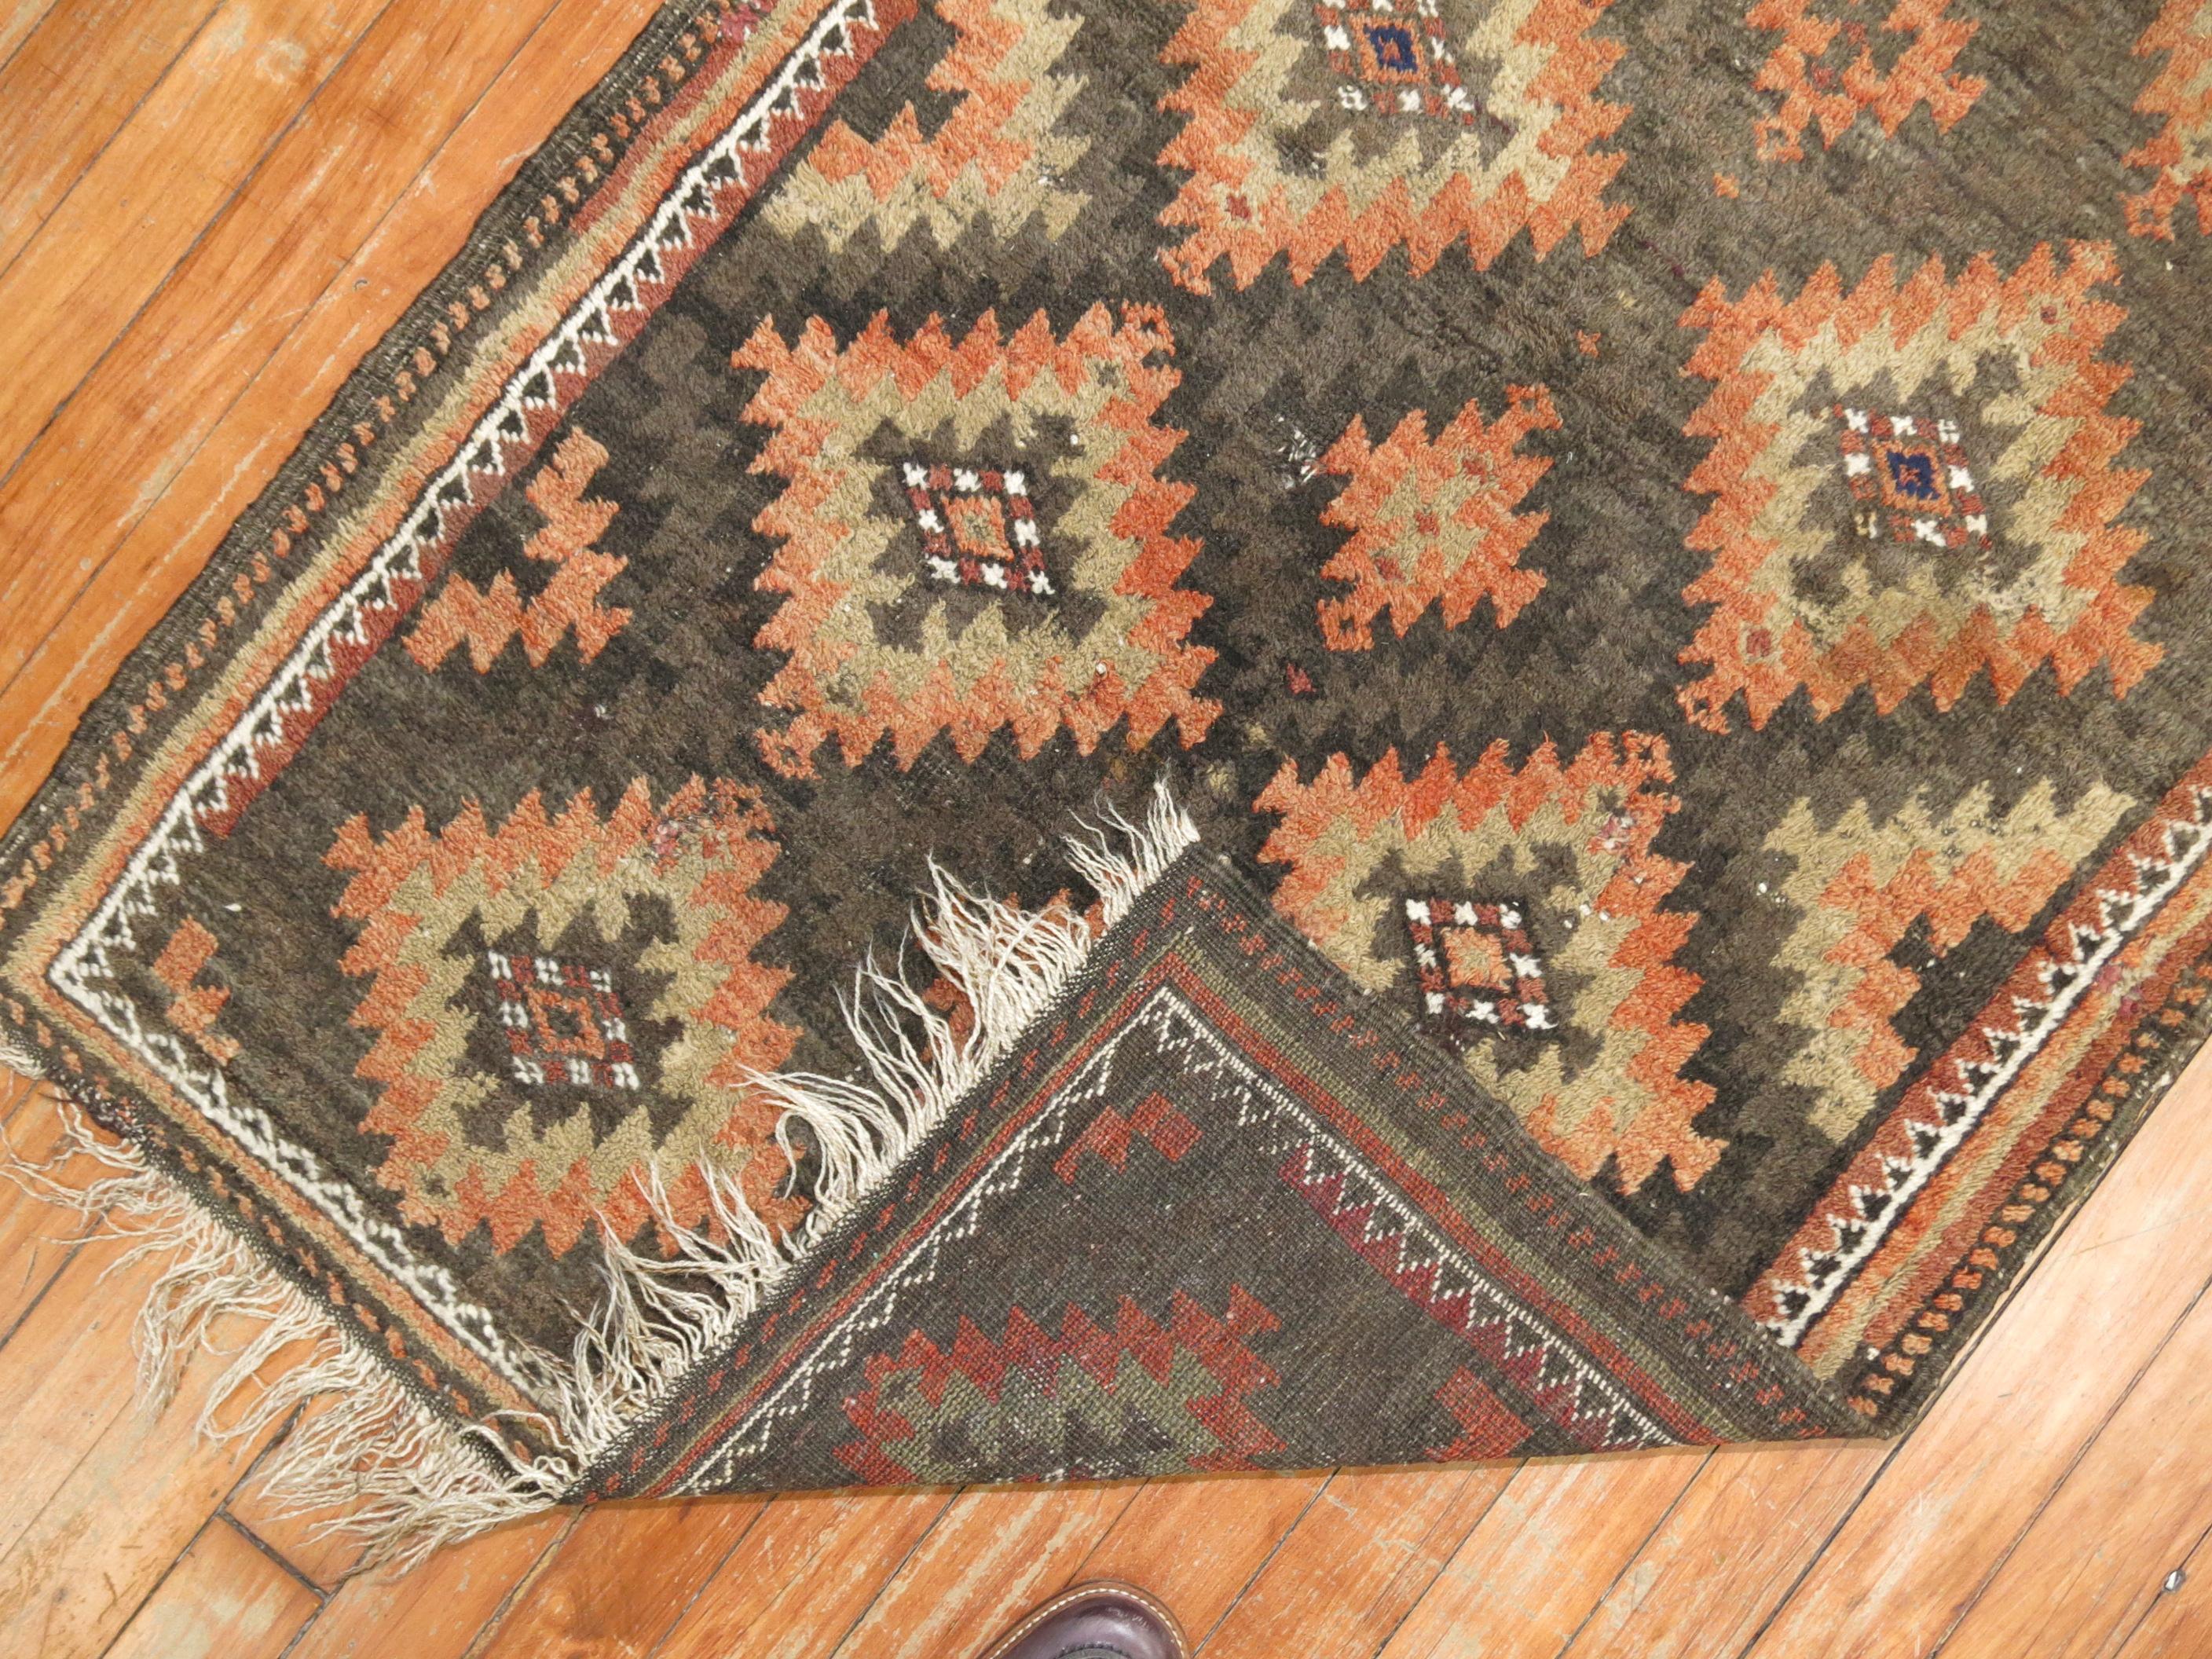 Hand-Woven Tribal Brown Orange Color Persian Balouch Rug For Sale